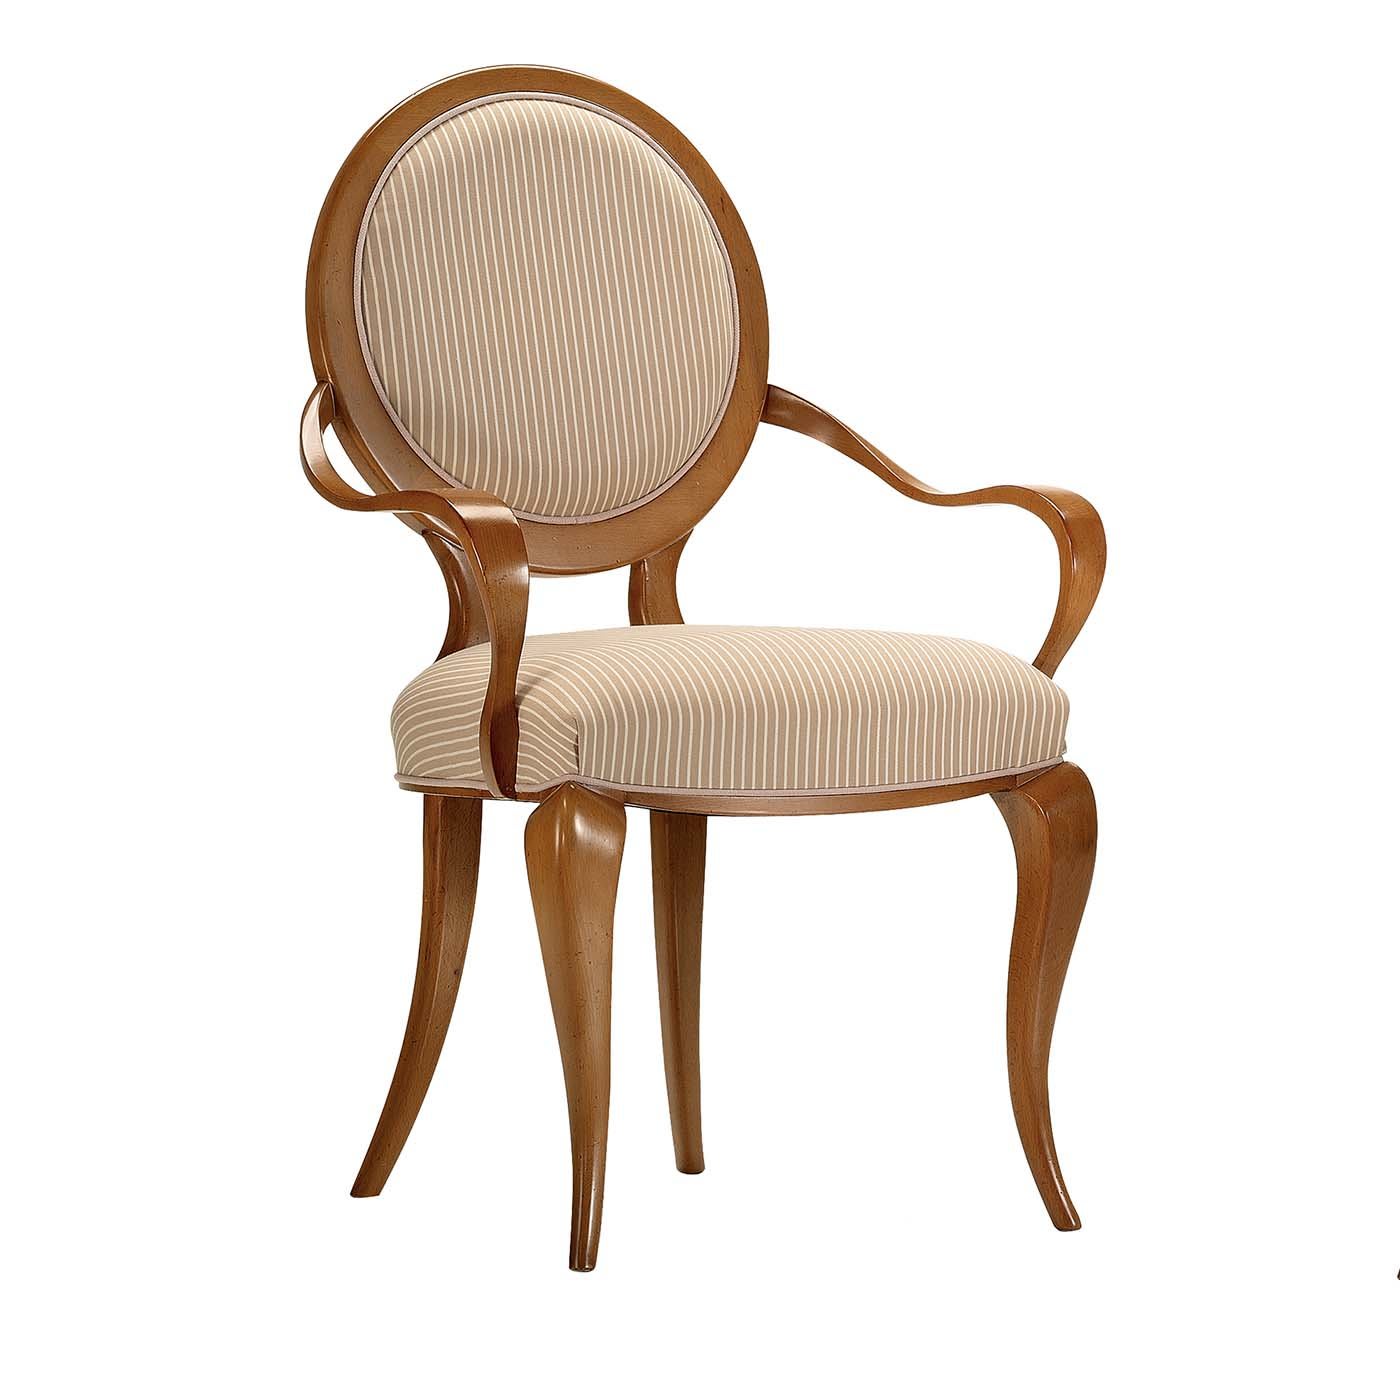 Dining Chair with Armrests #4 - Modenese Gastone